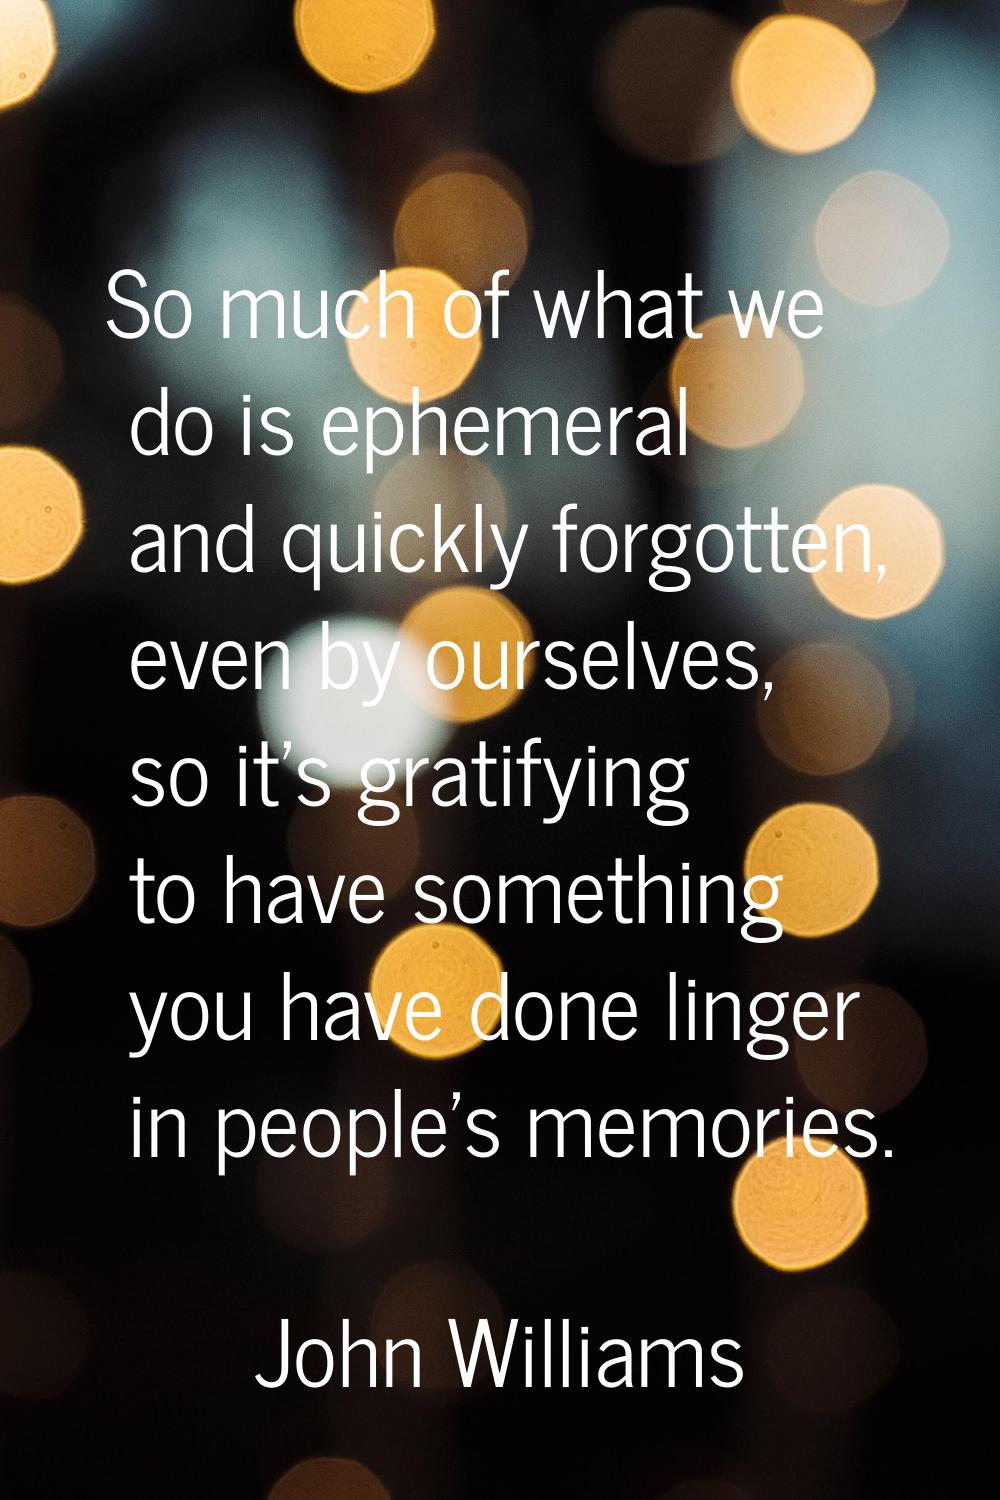 So much of what we do is ephemeral and quickly forgotten, even by ourselves, so it's gratifying to 